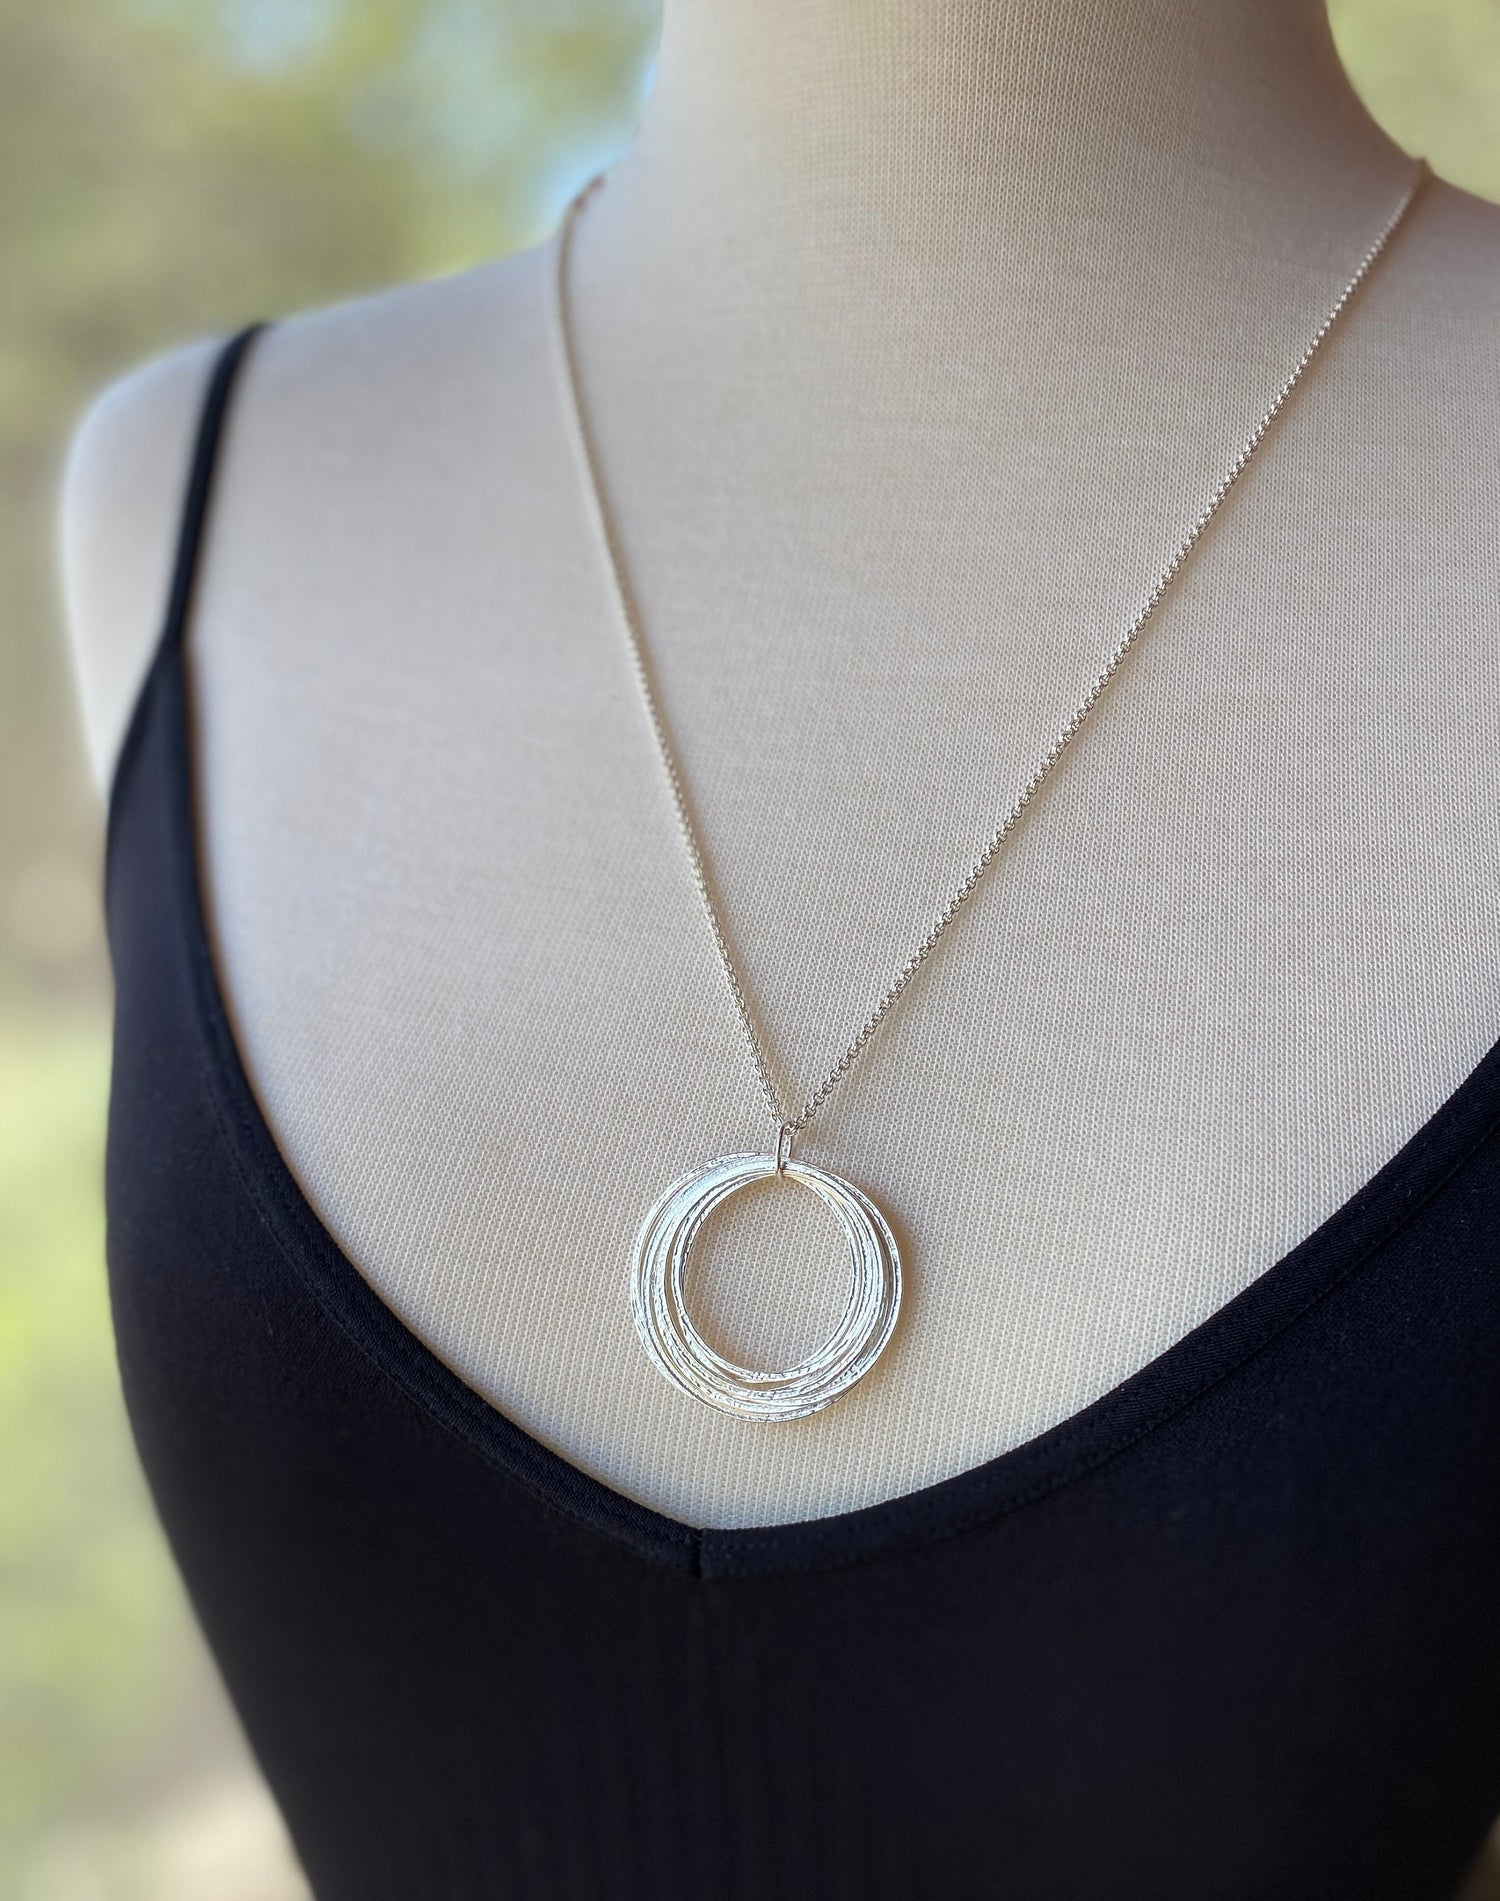 8 Circle 80th Birthday Milestone Necklace, Bold Sterling Silver Handcrafted Sparkly Circles Pendant, 8 Rings for 8 Decades, Large Circles